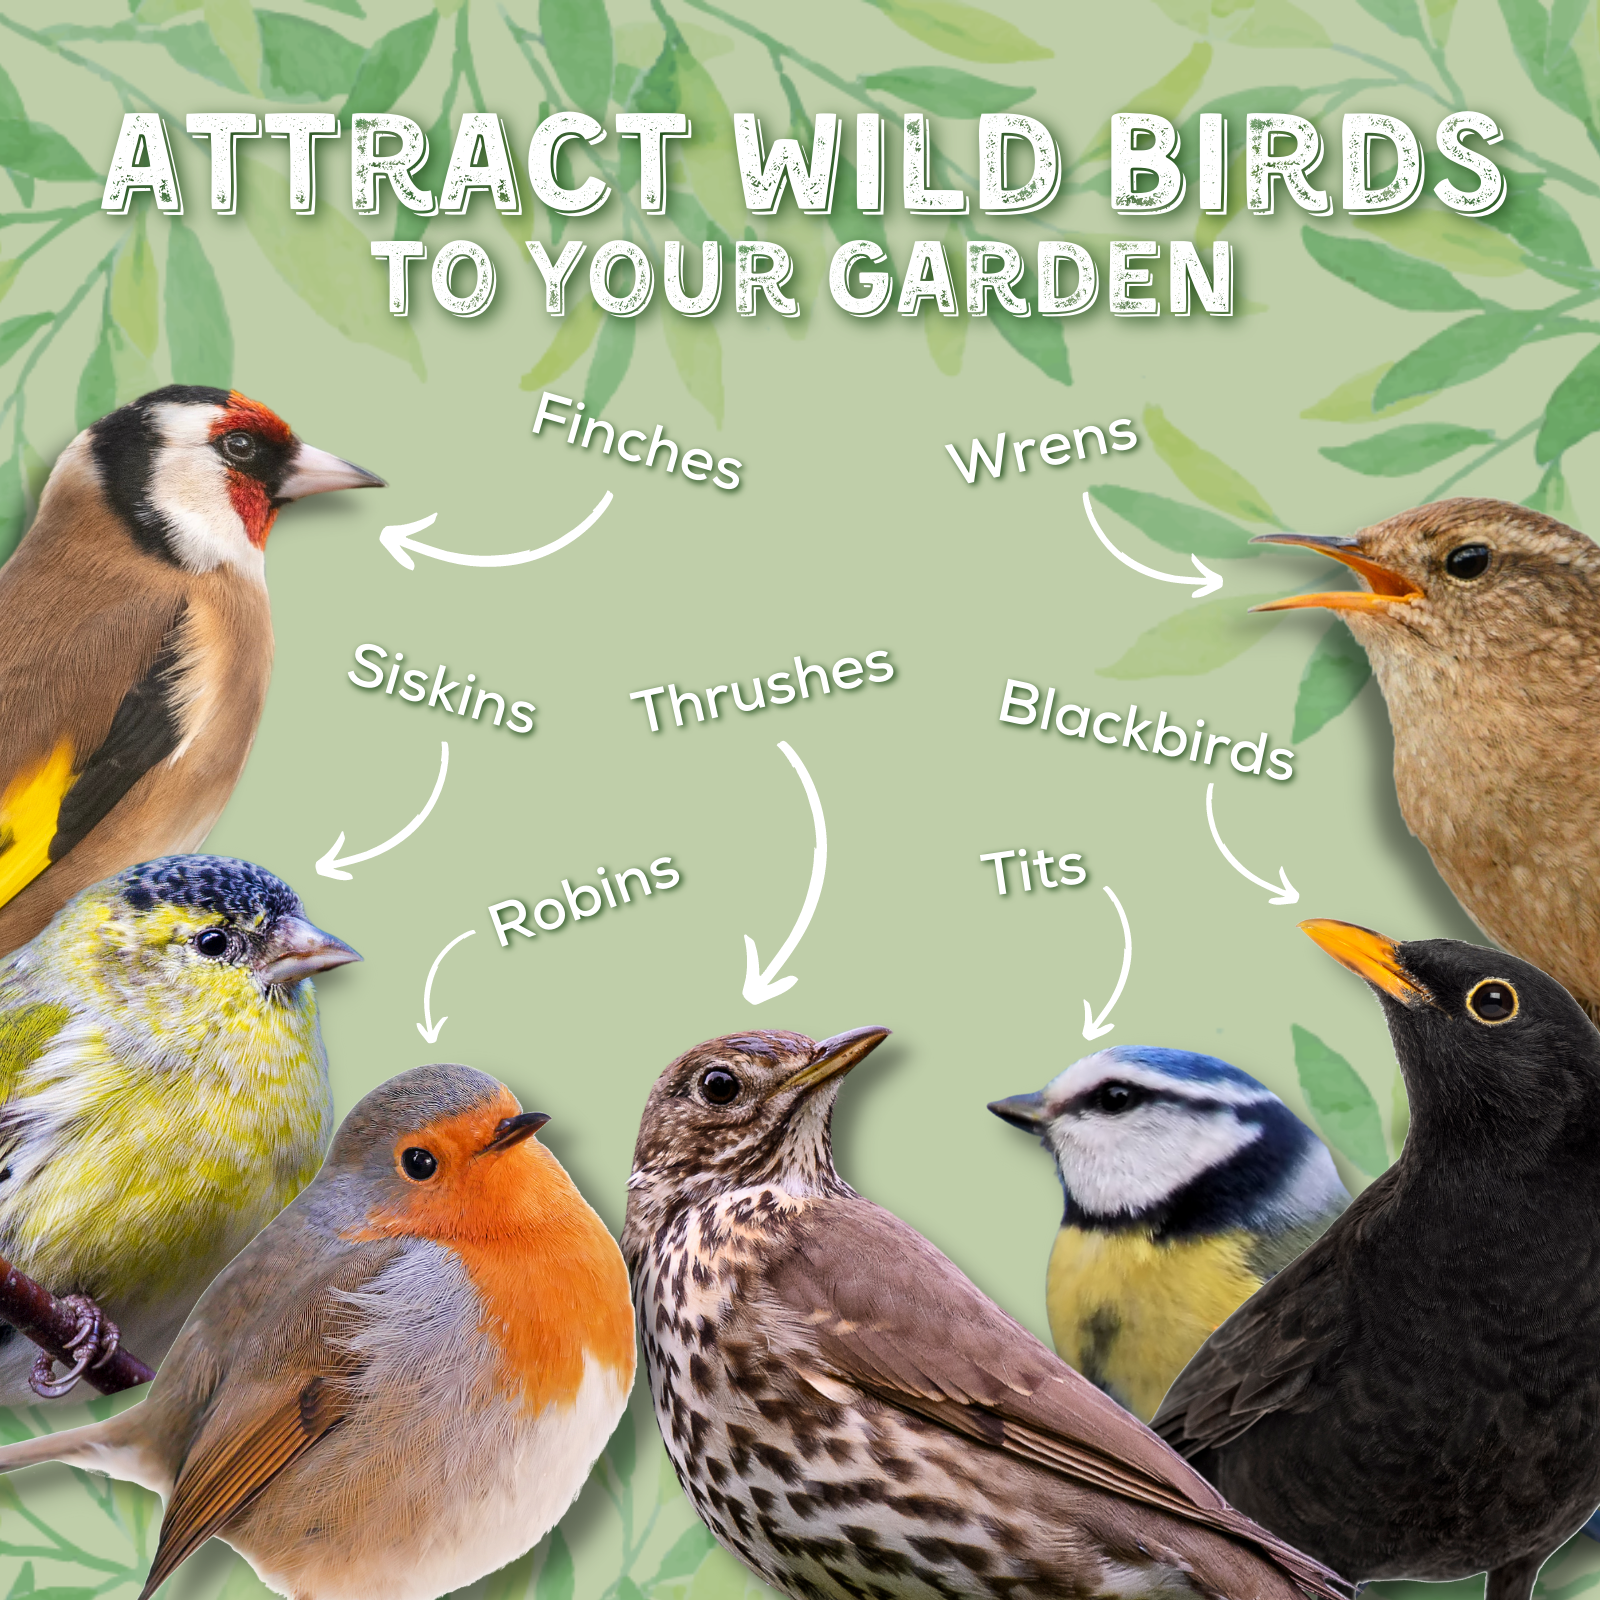 Attract wild birds to your garden: Finches, Siskins, Robins, Thrushes, Wrens, Blackbirds, Tits